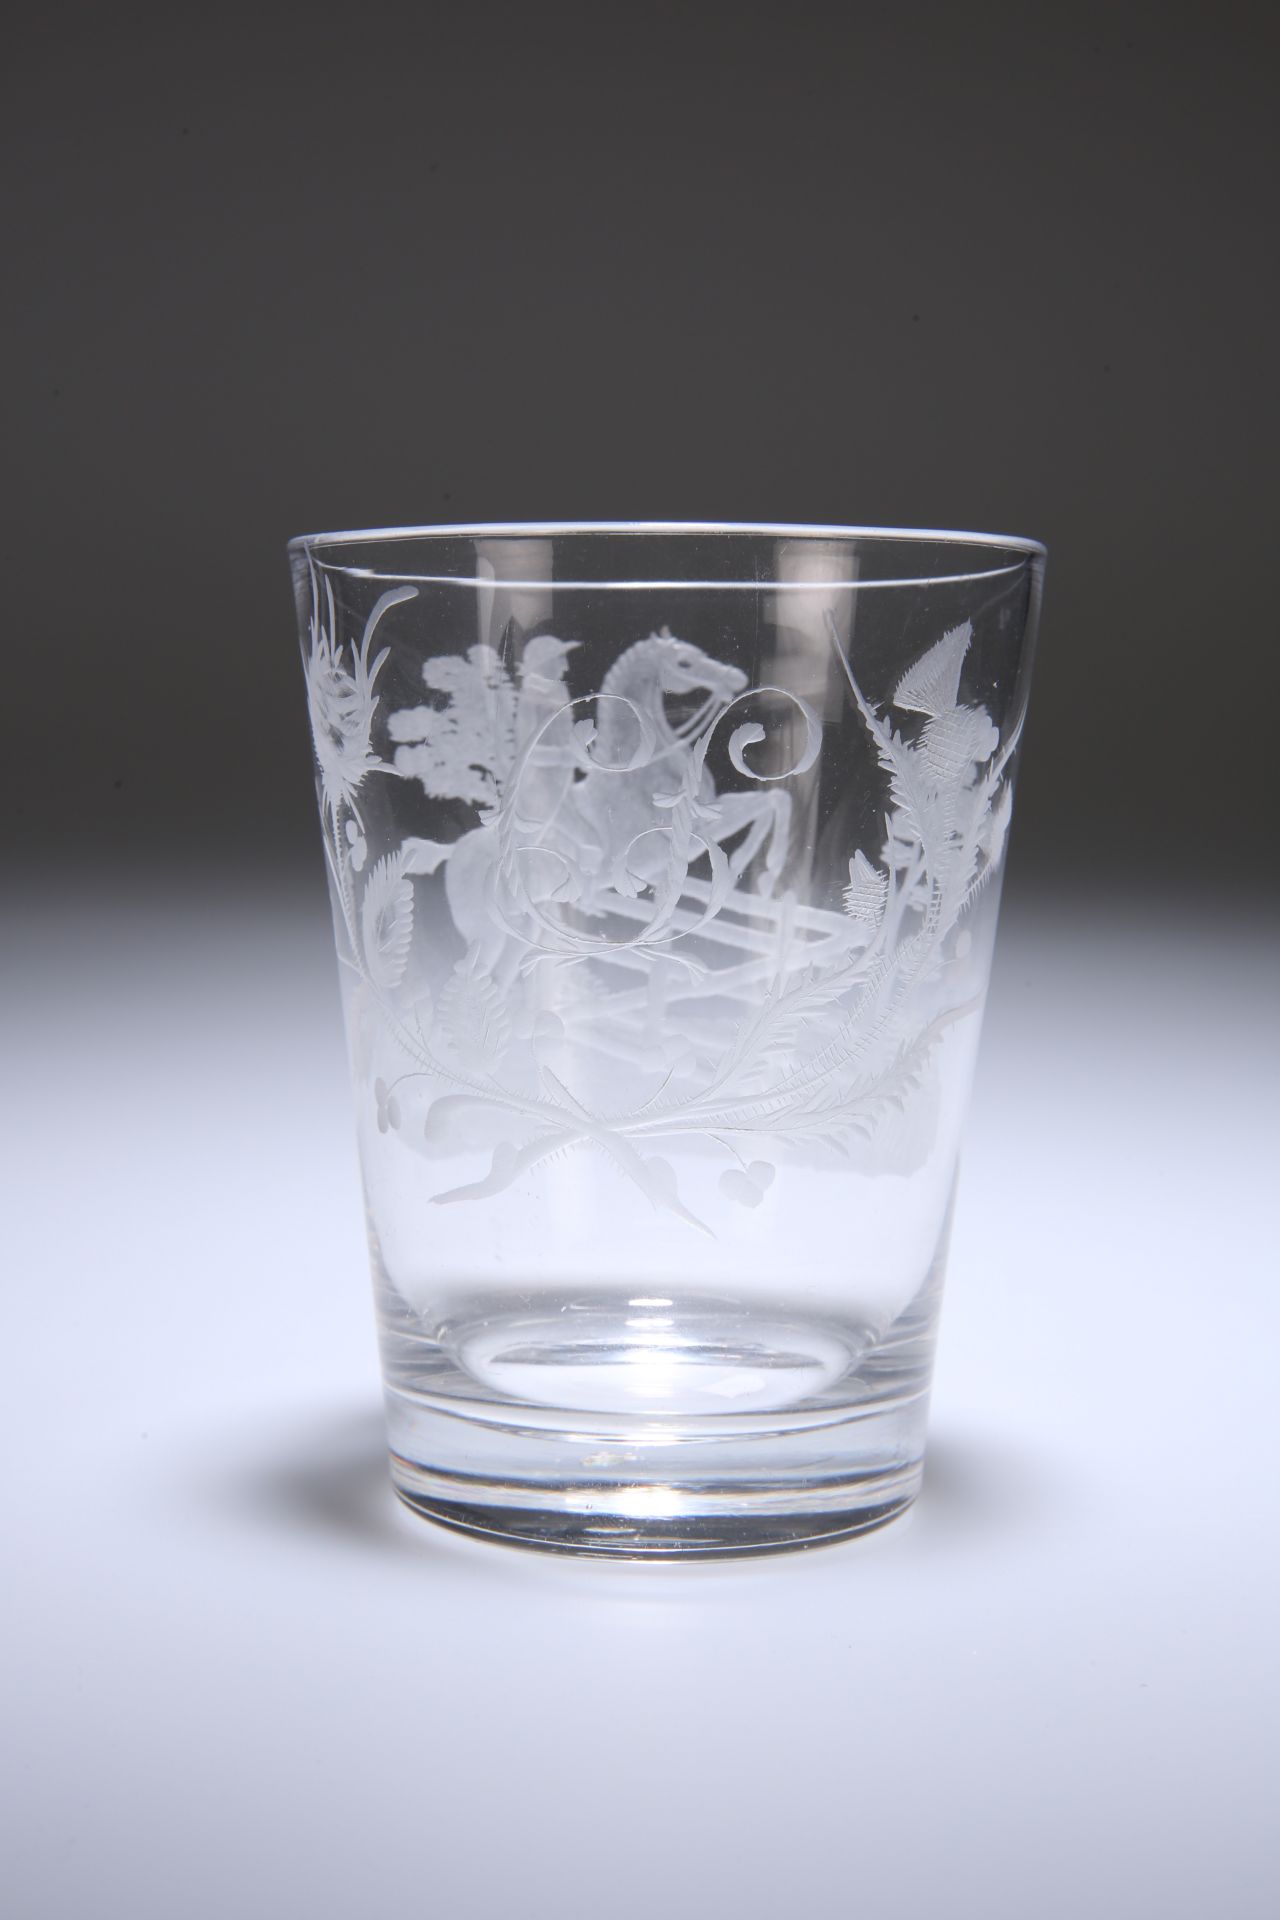 AN EARLY 19th CENTURY GLASS TUMBLER ENGRAVED WITH A HUNTSMAN - Image 2 of 2